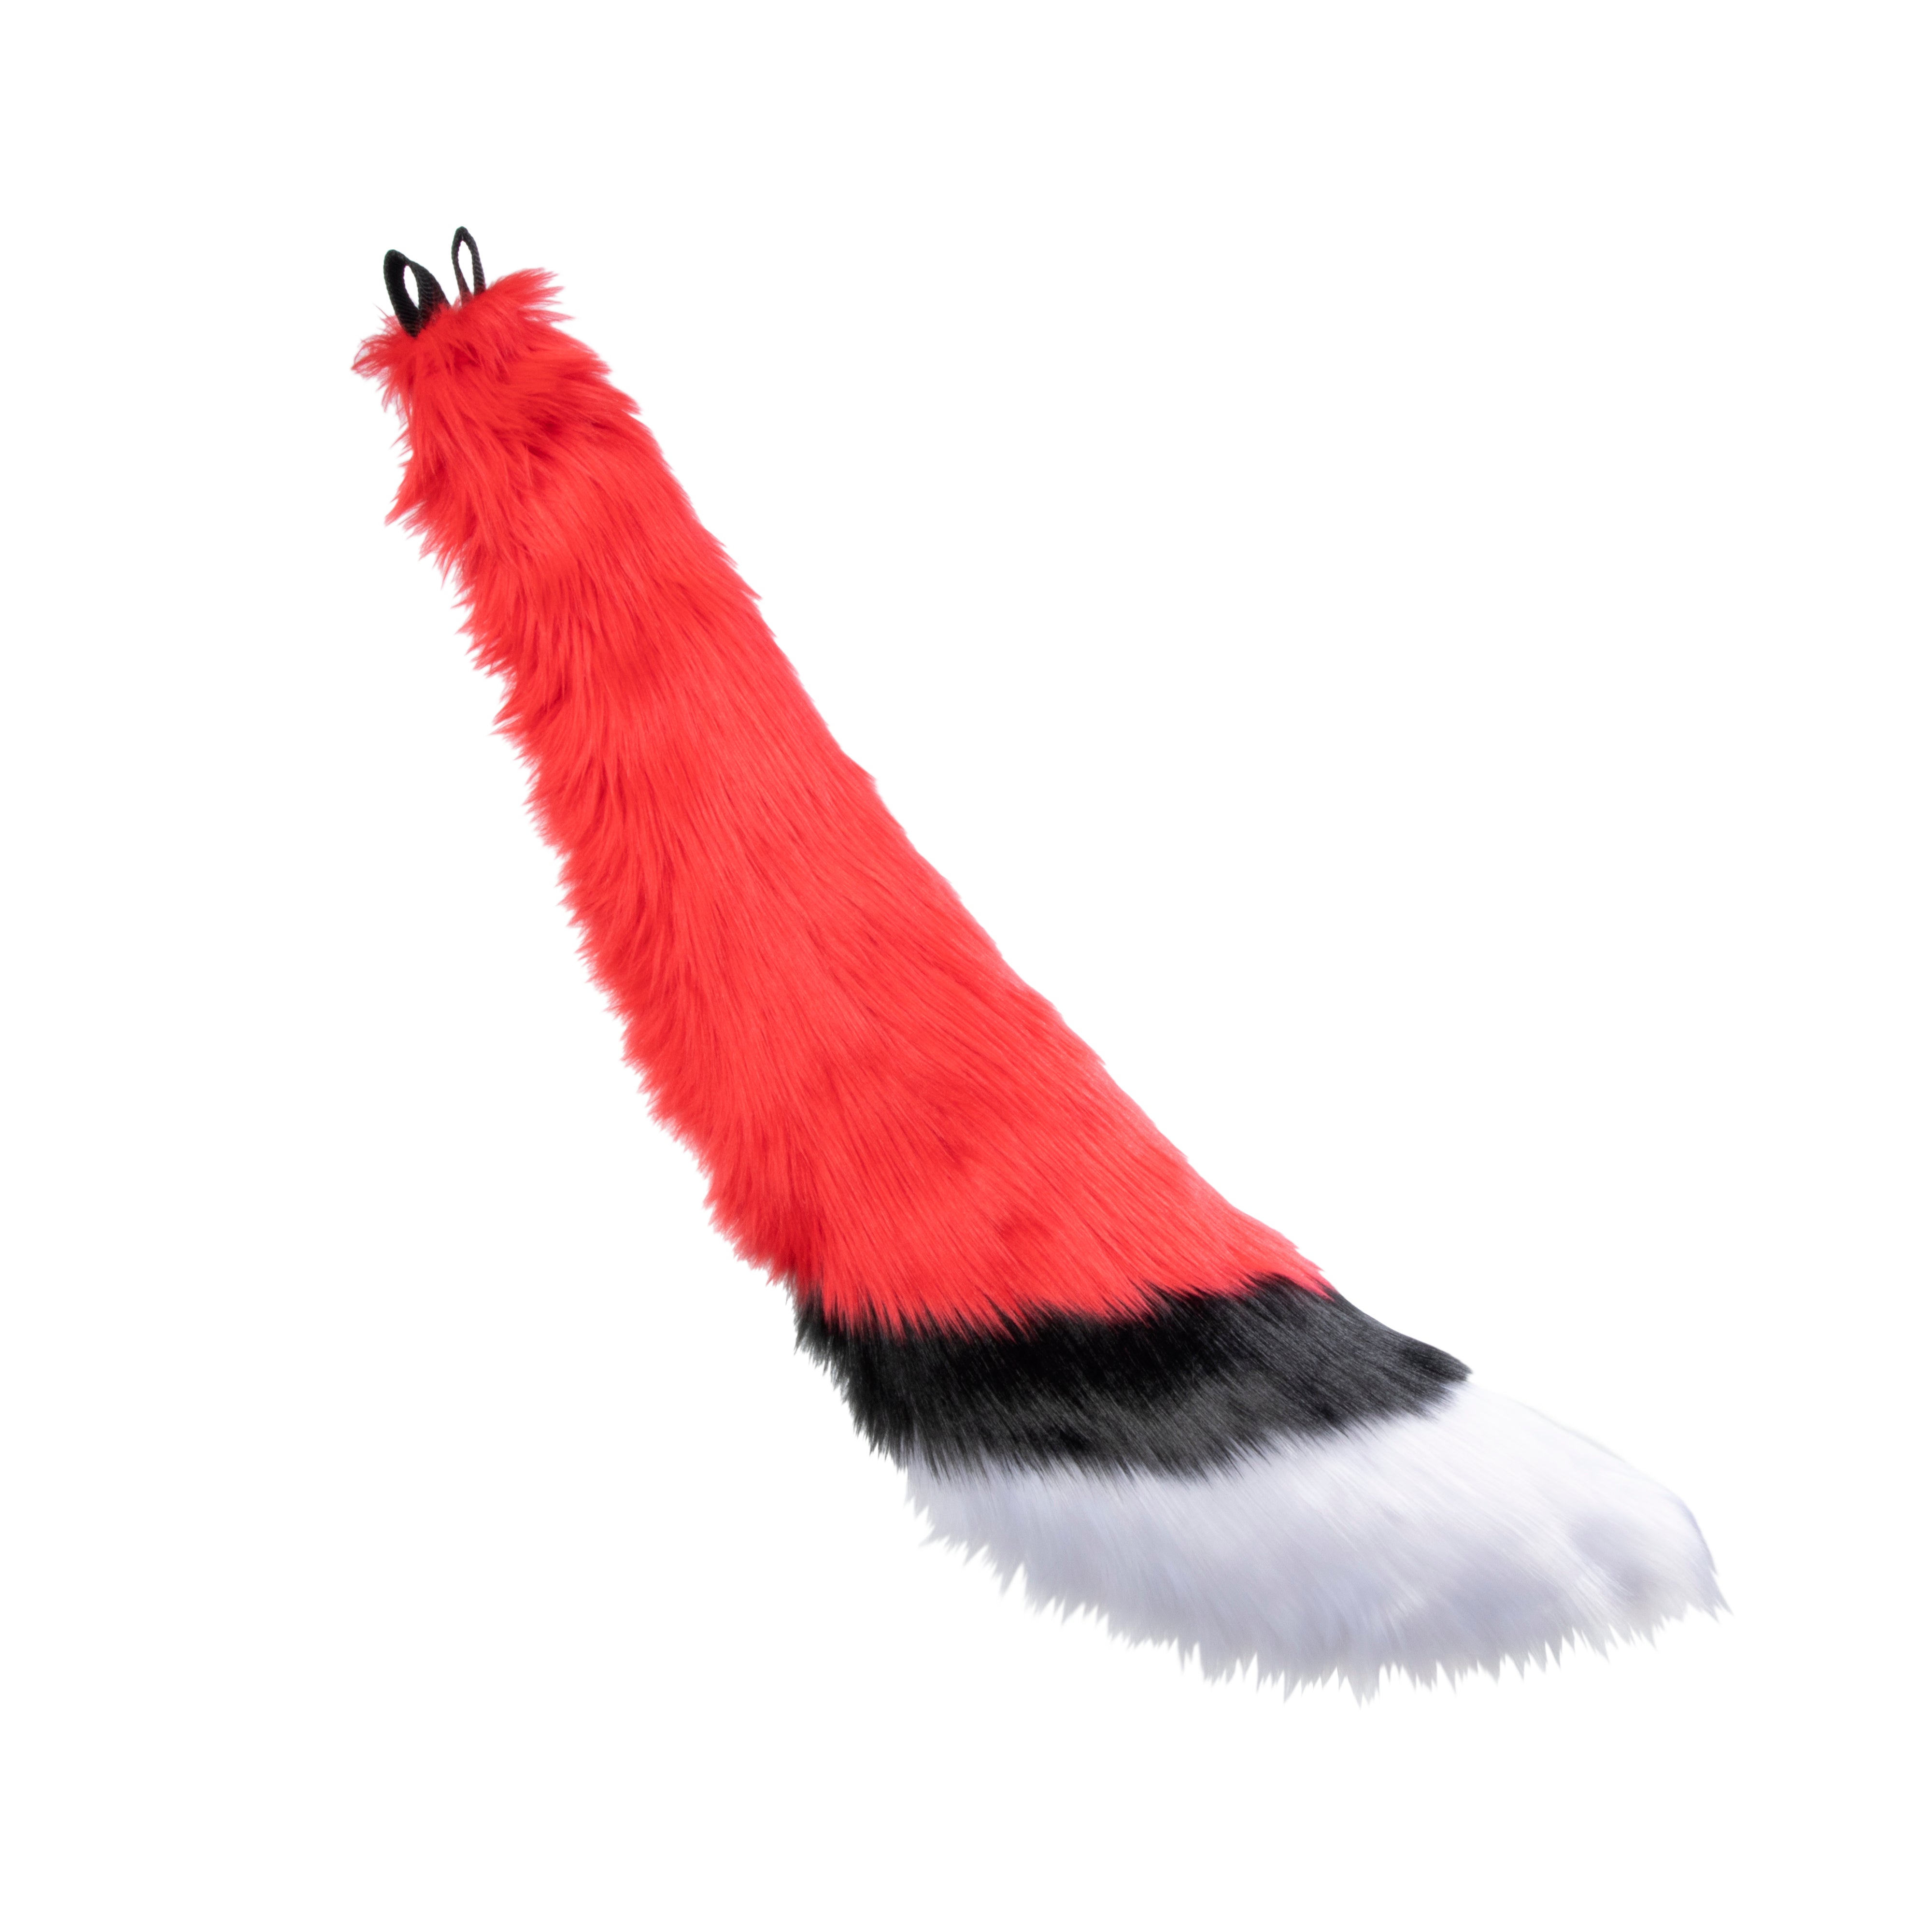 Pawstar Fox Tail + furry partial fursuit halloween costume cosplay accessory